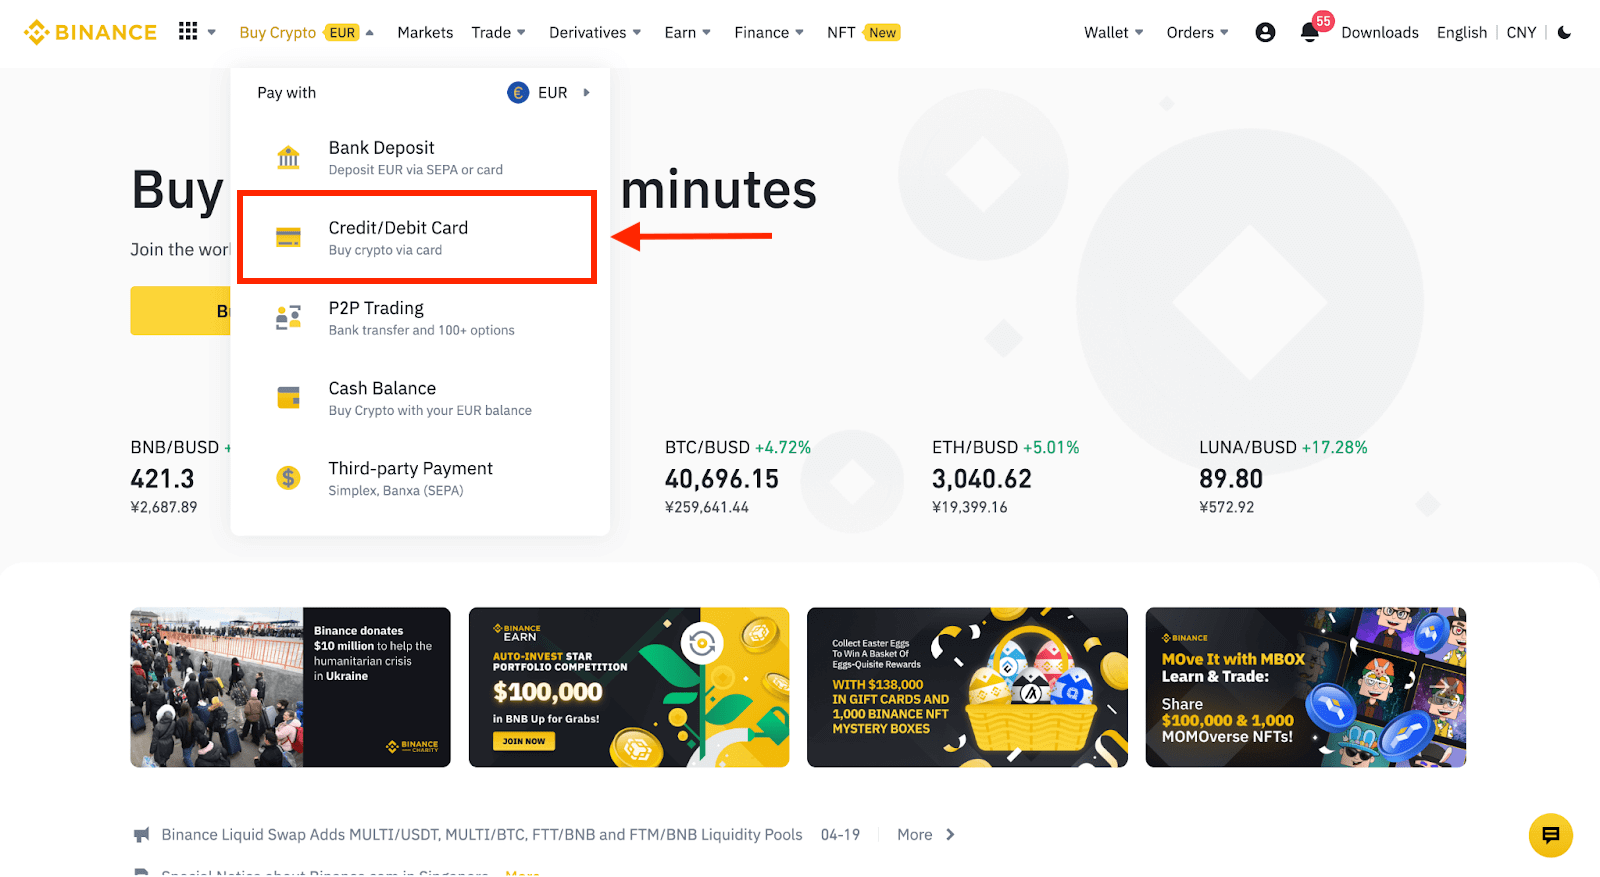 How to Sign Up and Deposit to Binance